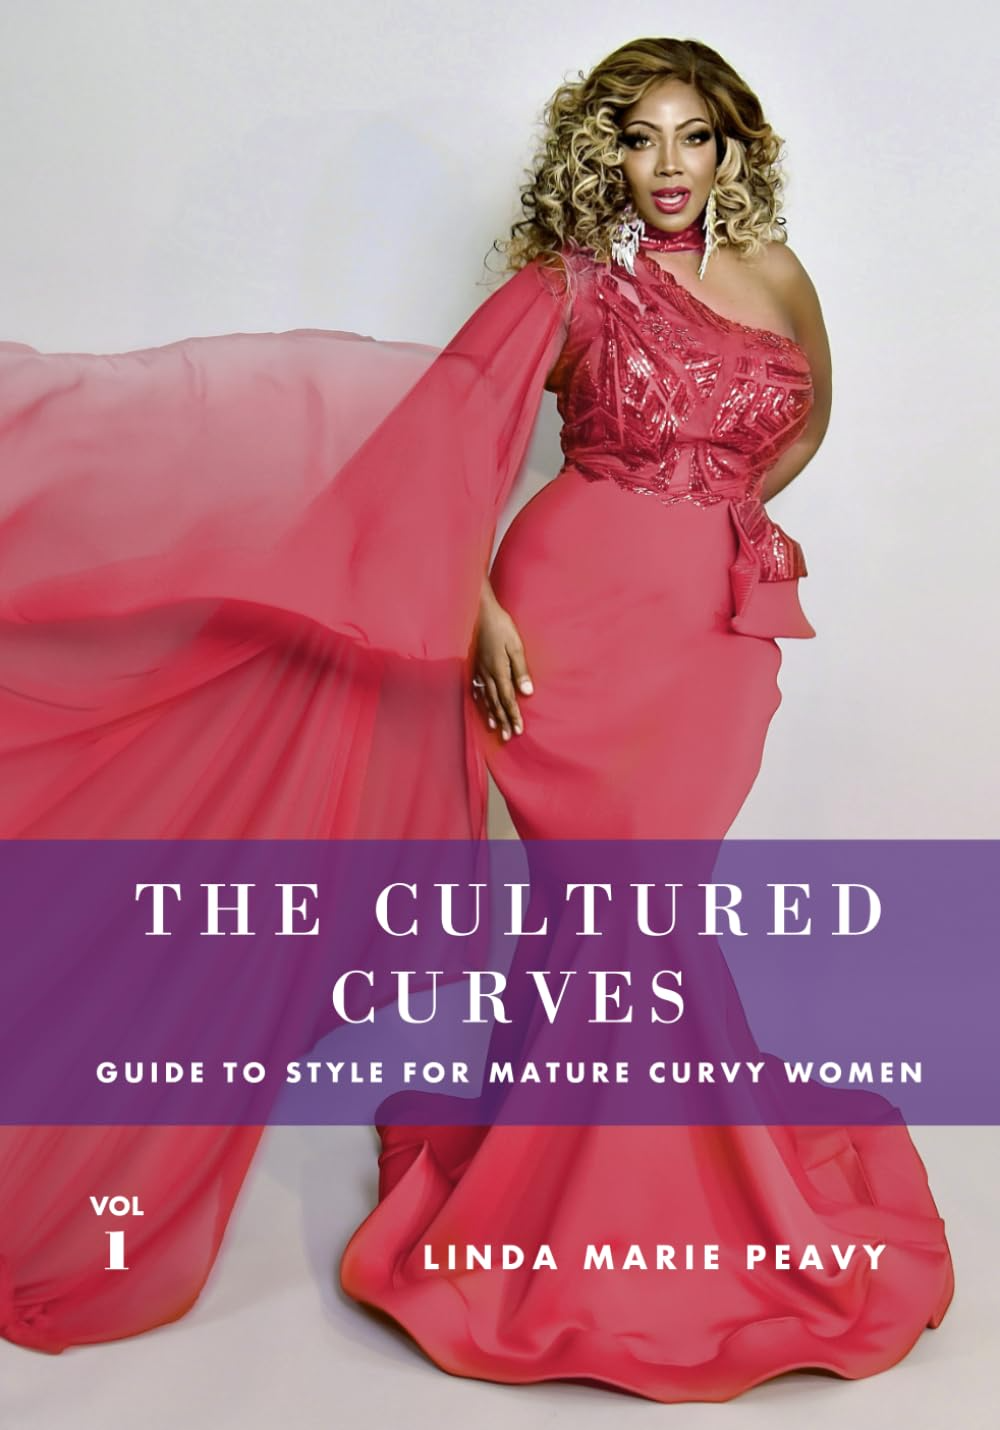 The Cultured Curves Guide to Style for Mature Curvy Women by Linda Peavy Book Cover